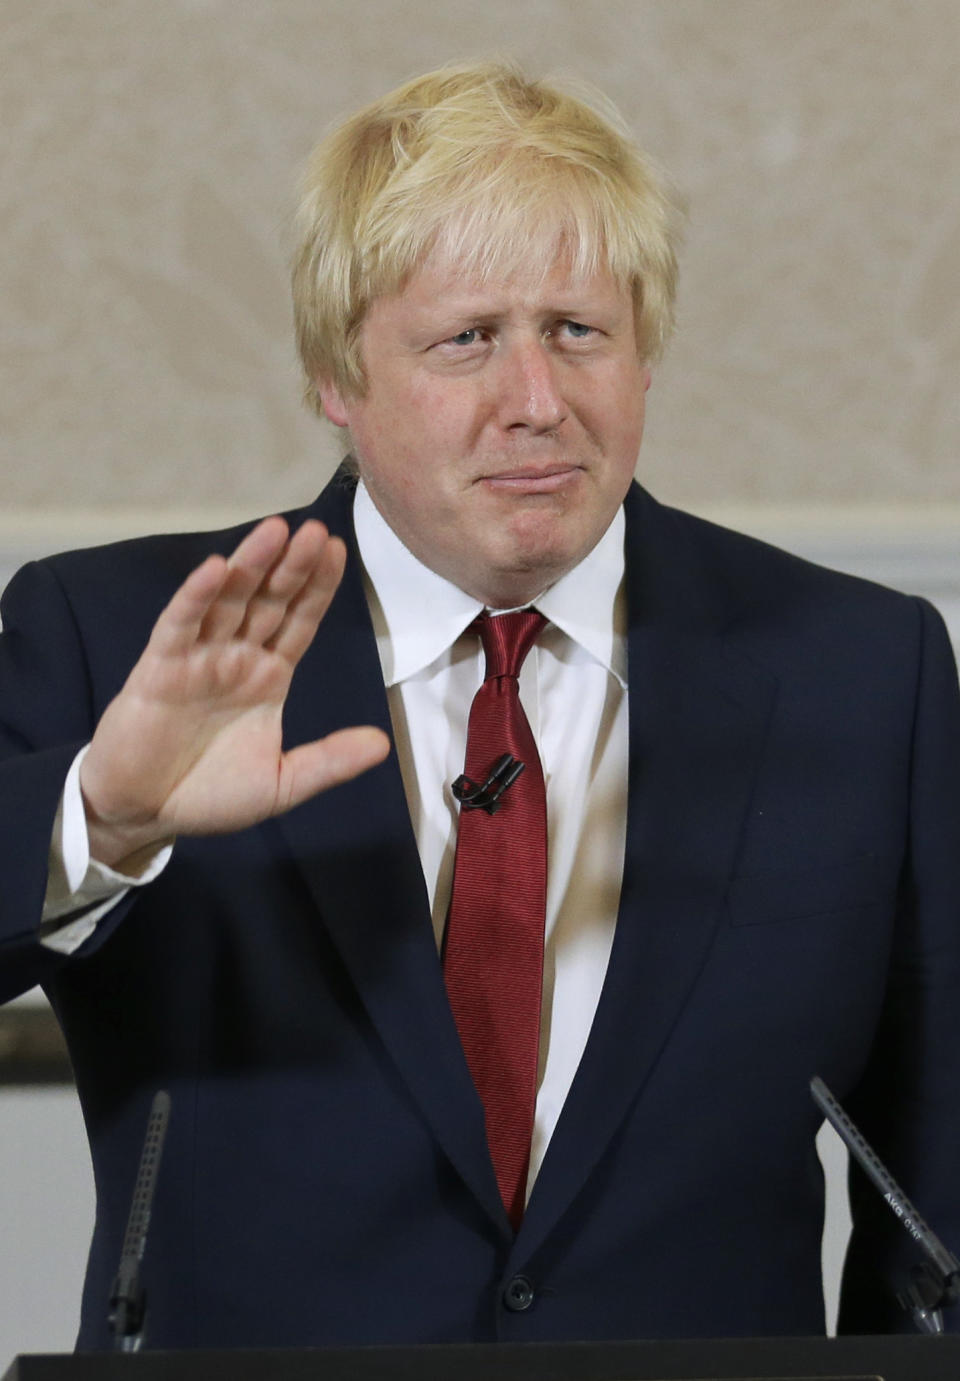 Former London mayor Boris Johnson waves as he announces that he will not run for  leadership of Britain's ruling Conservative Party in London, Thursday, June 30, 2016. The battle to succeed Prime Minister David Cameron as Conservative Party leader has drawn strong contenders with the winner set to become prime minister and play a vital role in shaping Britain's relationship with the European Union after last week's Brexit vote. (AP Photo/Matt Dunham)